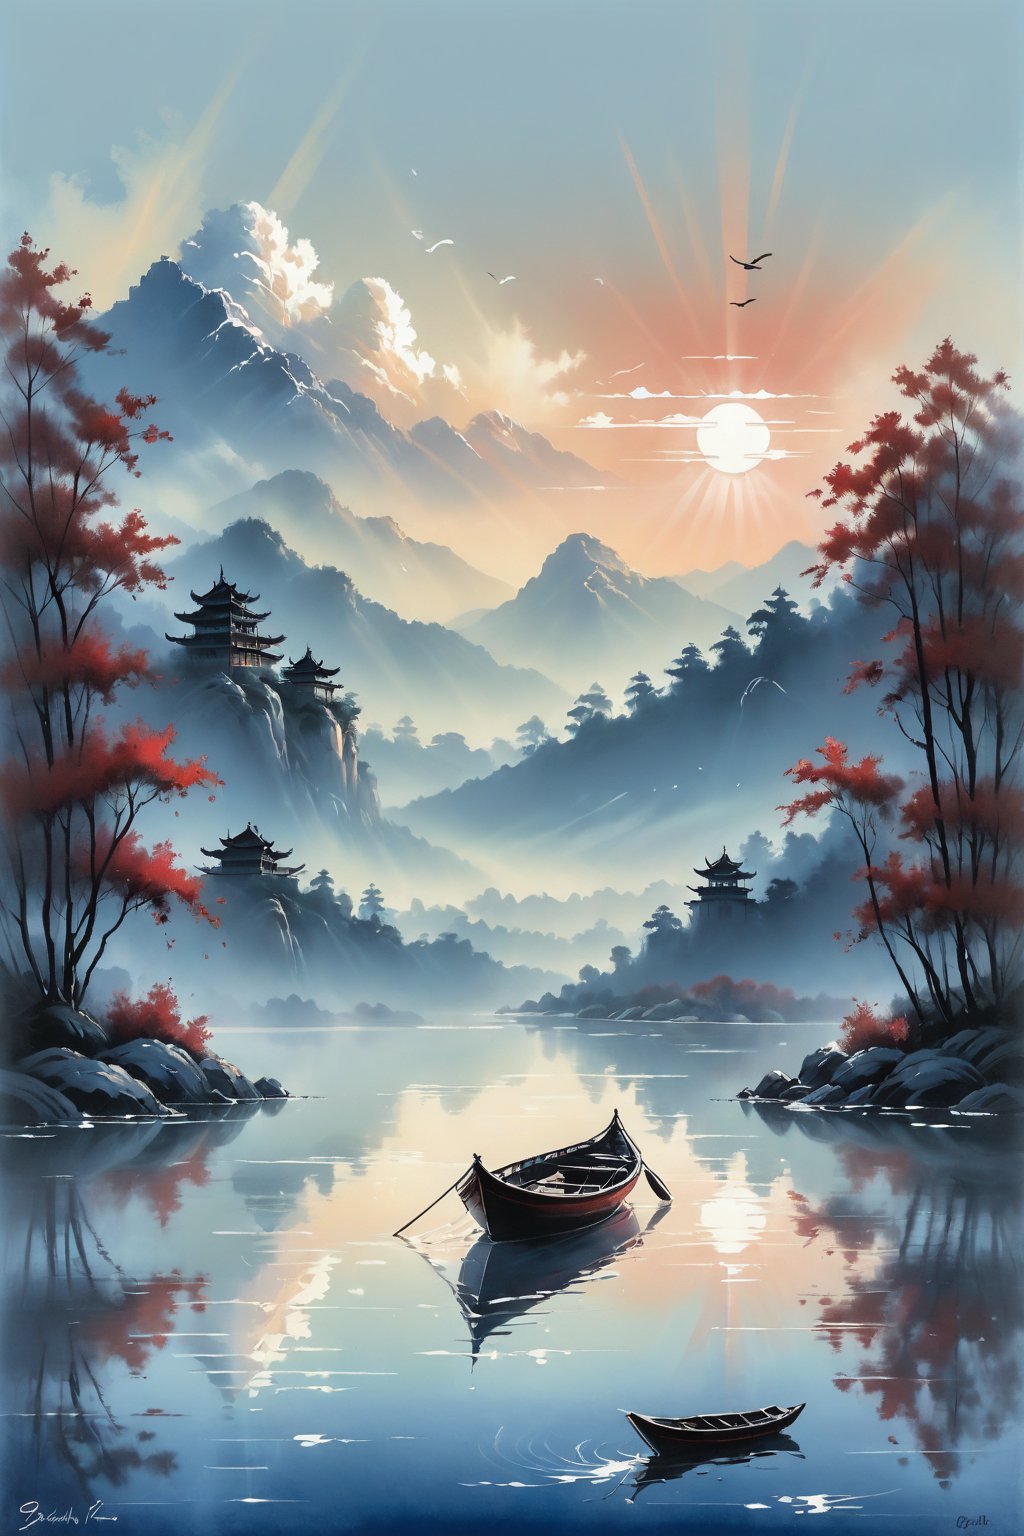 A serene lake scene at sunset, bathed in muted hues of indigo and crimson, with a solitary boat gliding effortlessly across the calm water. The surrounding trees, their branches stretching towards the sky, create a sense of depth and dimensionality. The river valley in the distance, shrouded in negative space, beckons the viewer's gaze. In the style of traditional Chinese ink drawing, the composition is simple yet evocative, with gentle ripples on the lake's surface reflecting the beauty of nature.